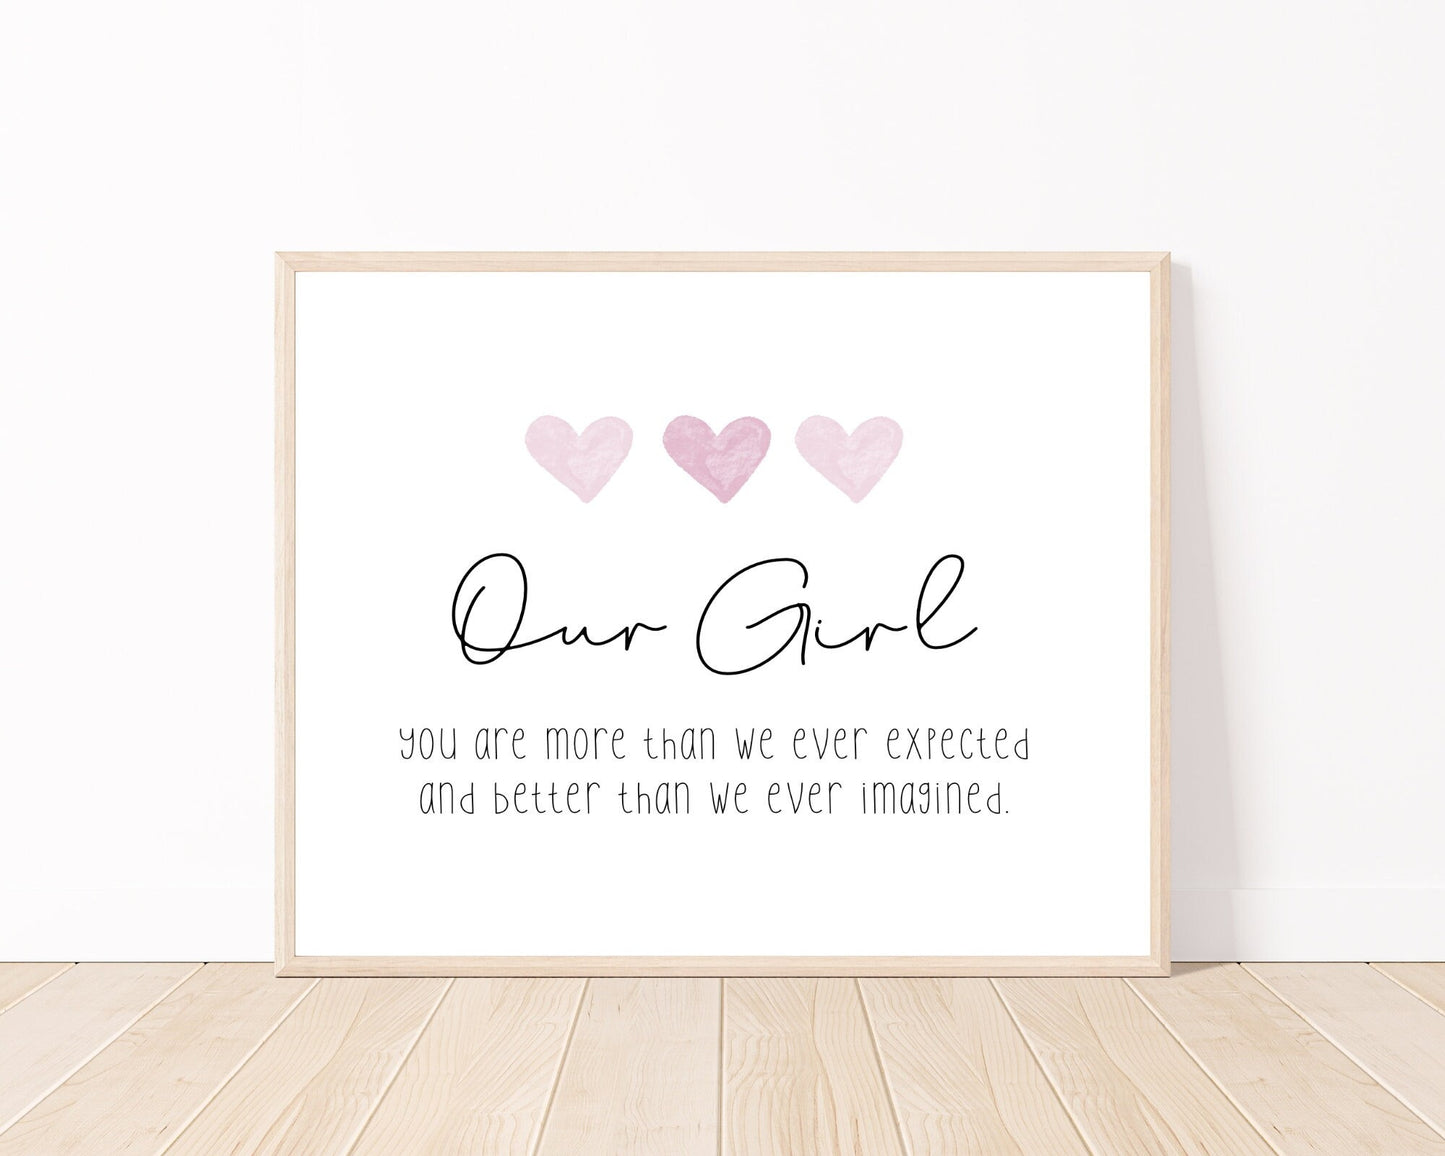 A little girl’s graphic showing three baby pink hearts with a piece of writing below that says: Our girl, you are more than we ever expected, and better than we ever imagined.